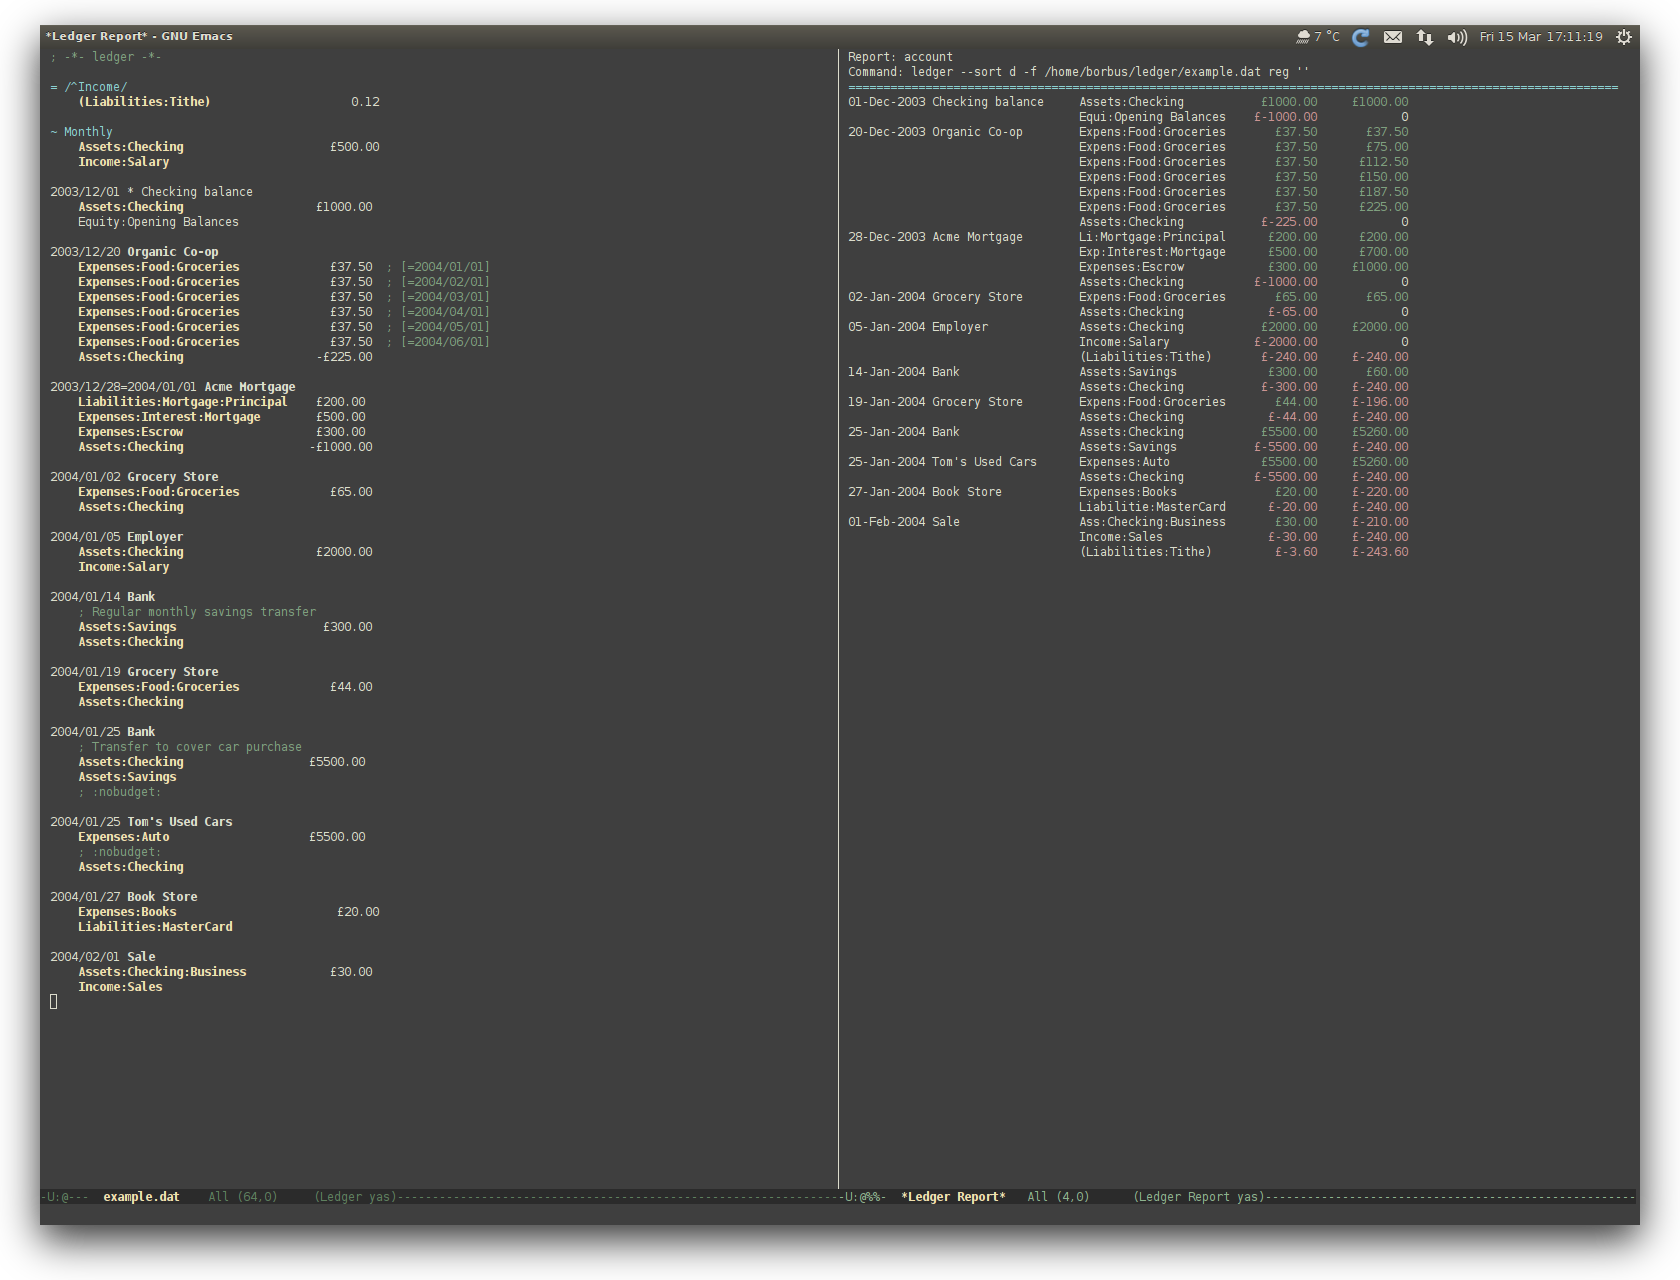 /TakeV/spacemacs/media/commit/a18998ccfd619d256c36b786097f420e6333305a/layers/finance/img/ledger.png